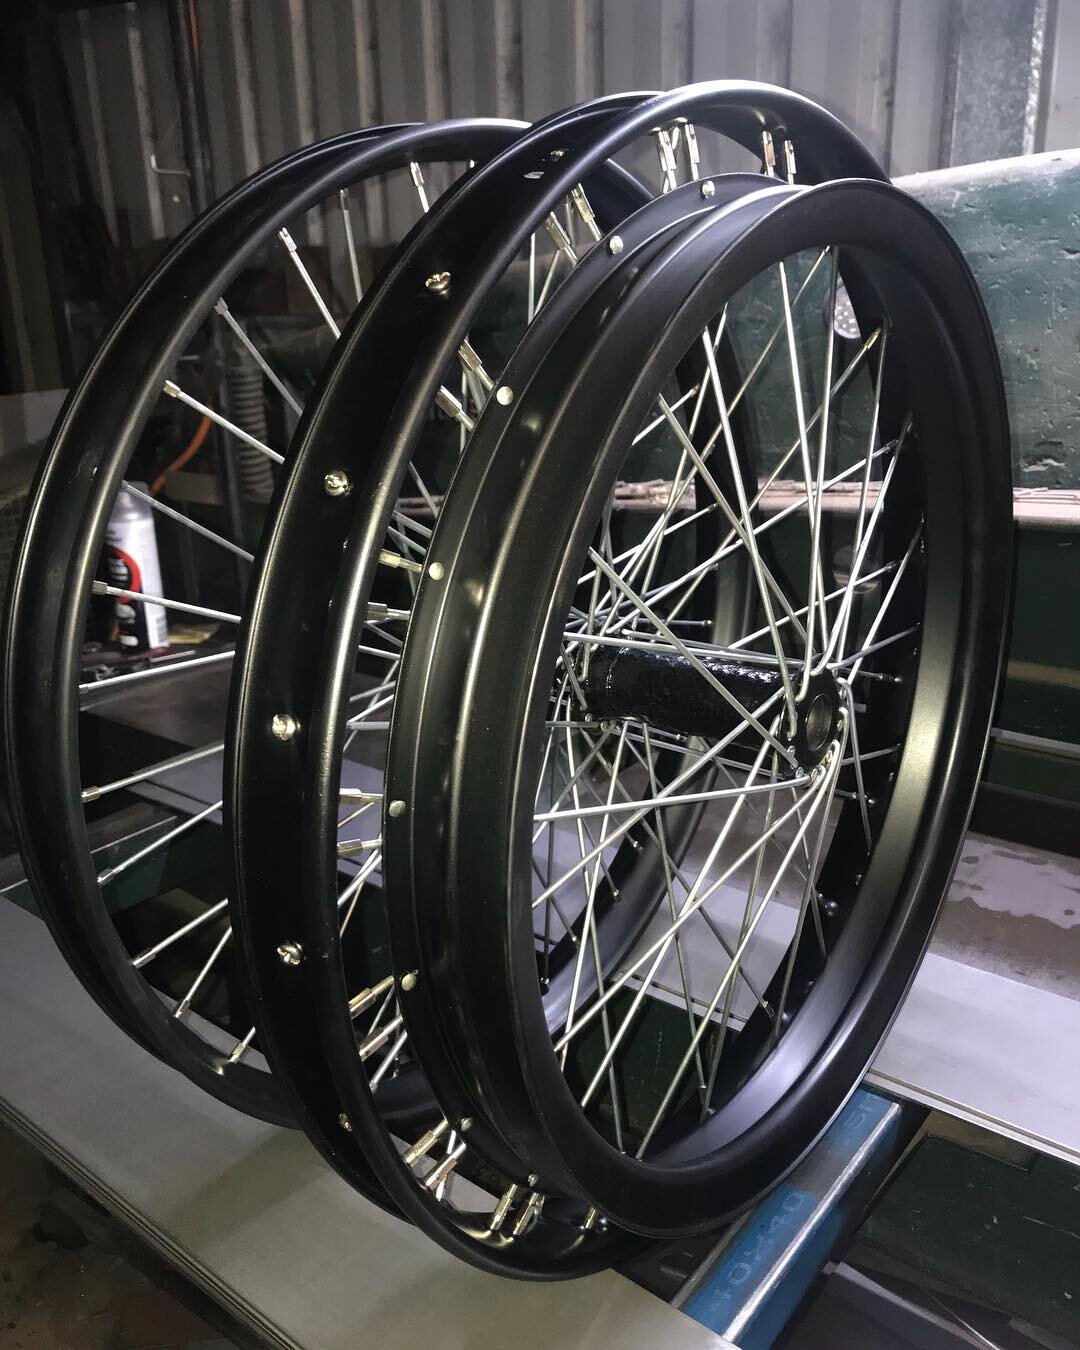 My pride &amp; passion goes into building veteran &amp; Vintage motorcycle wheels.
All I need is your hubs, and some specs on your rims &amp; spokes and I can build them up .
These are 1912 Ariel. Satin black with zinc spokes.